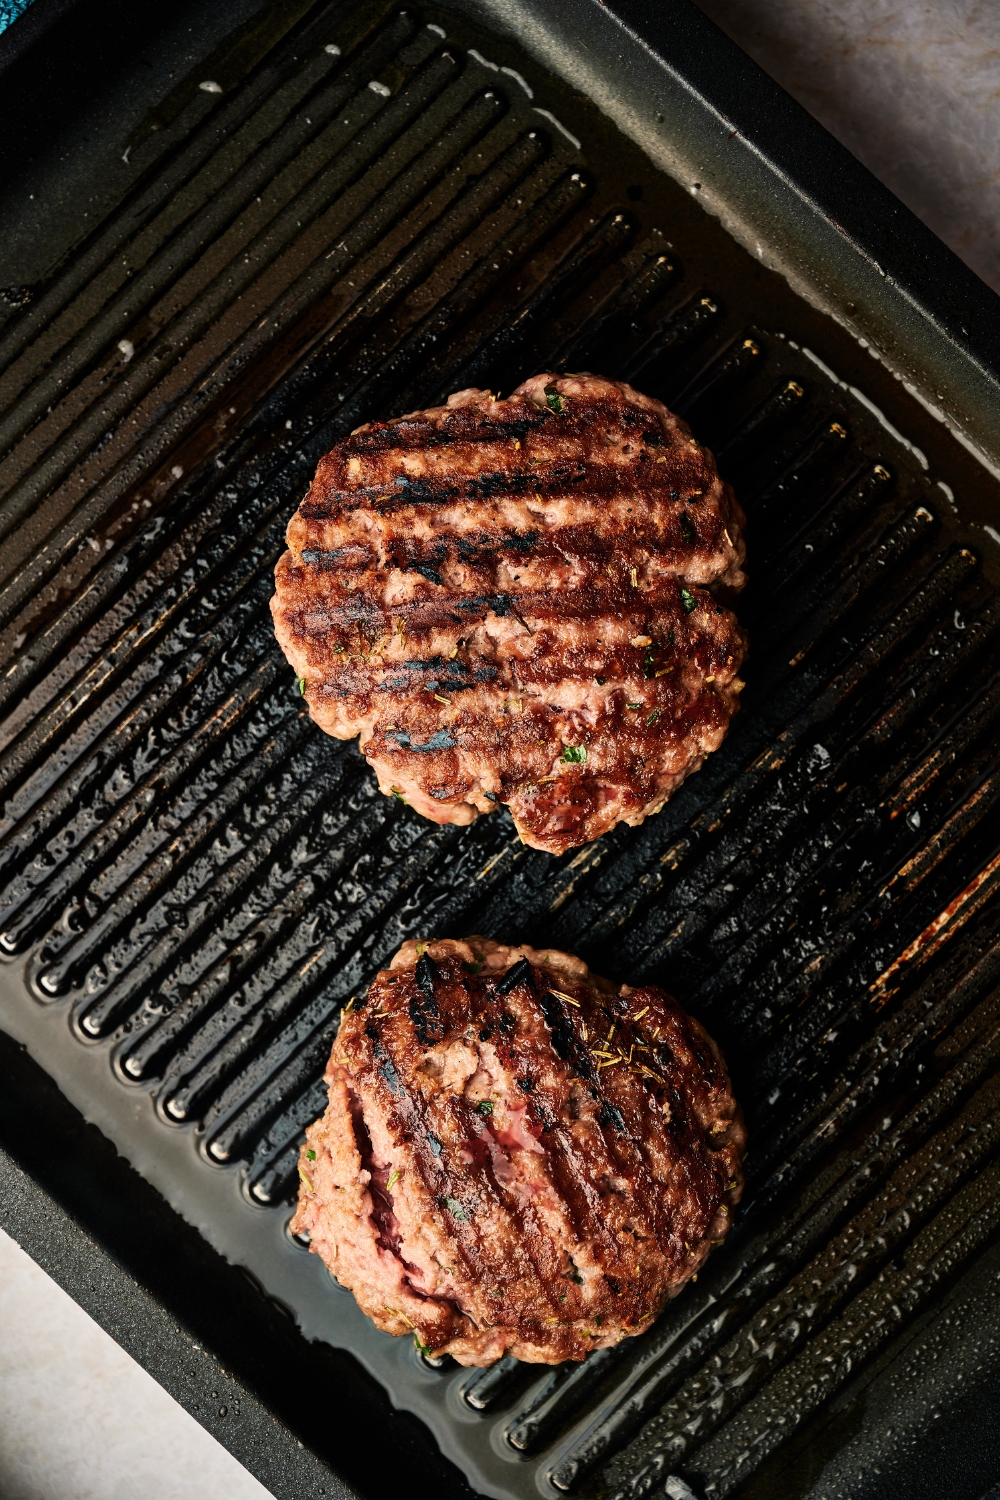 Two lamb patties are on a grill pan. Each patty has dark grill marks.